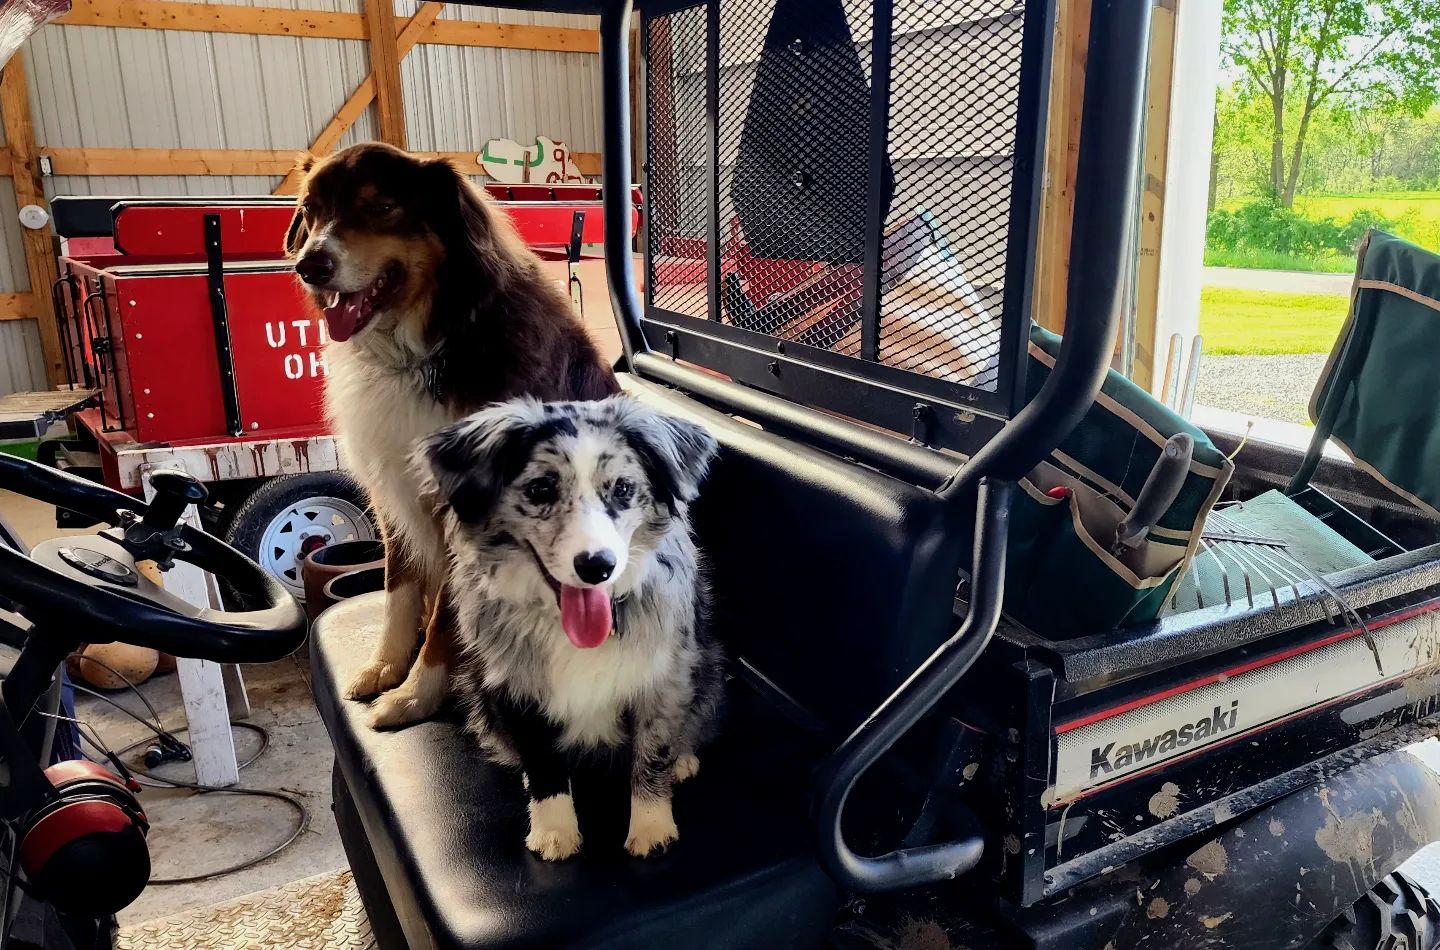 Open the barn door and they run to the Mule ready to work in the yard today. #thisisfoster #thisisgizmo